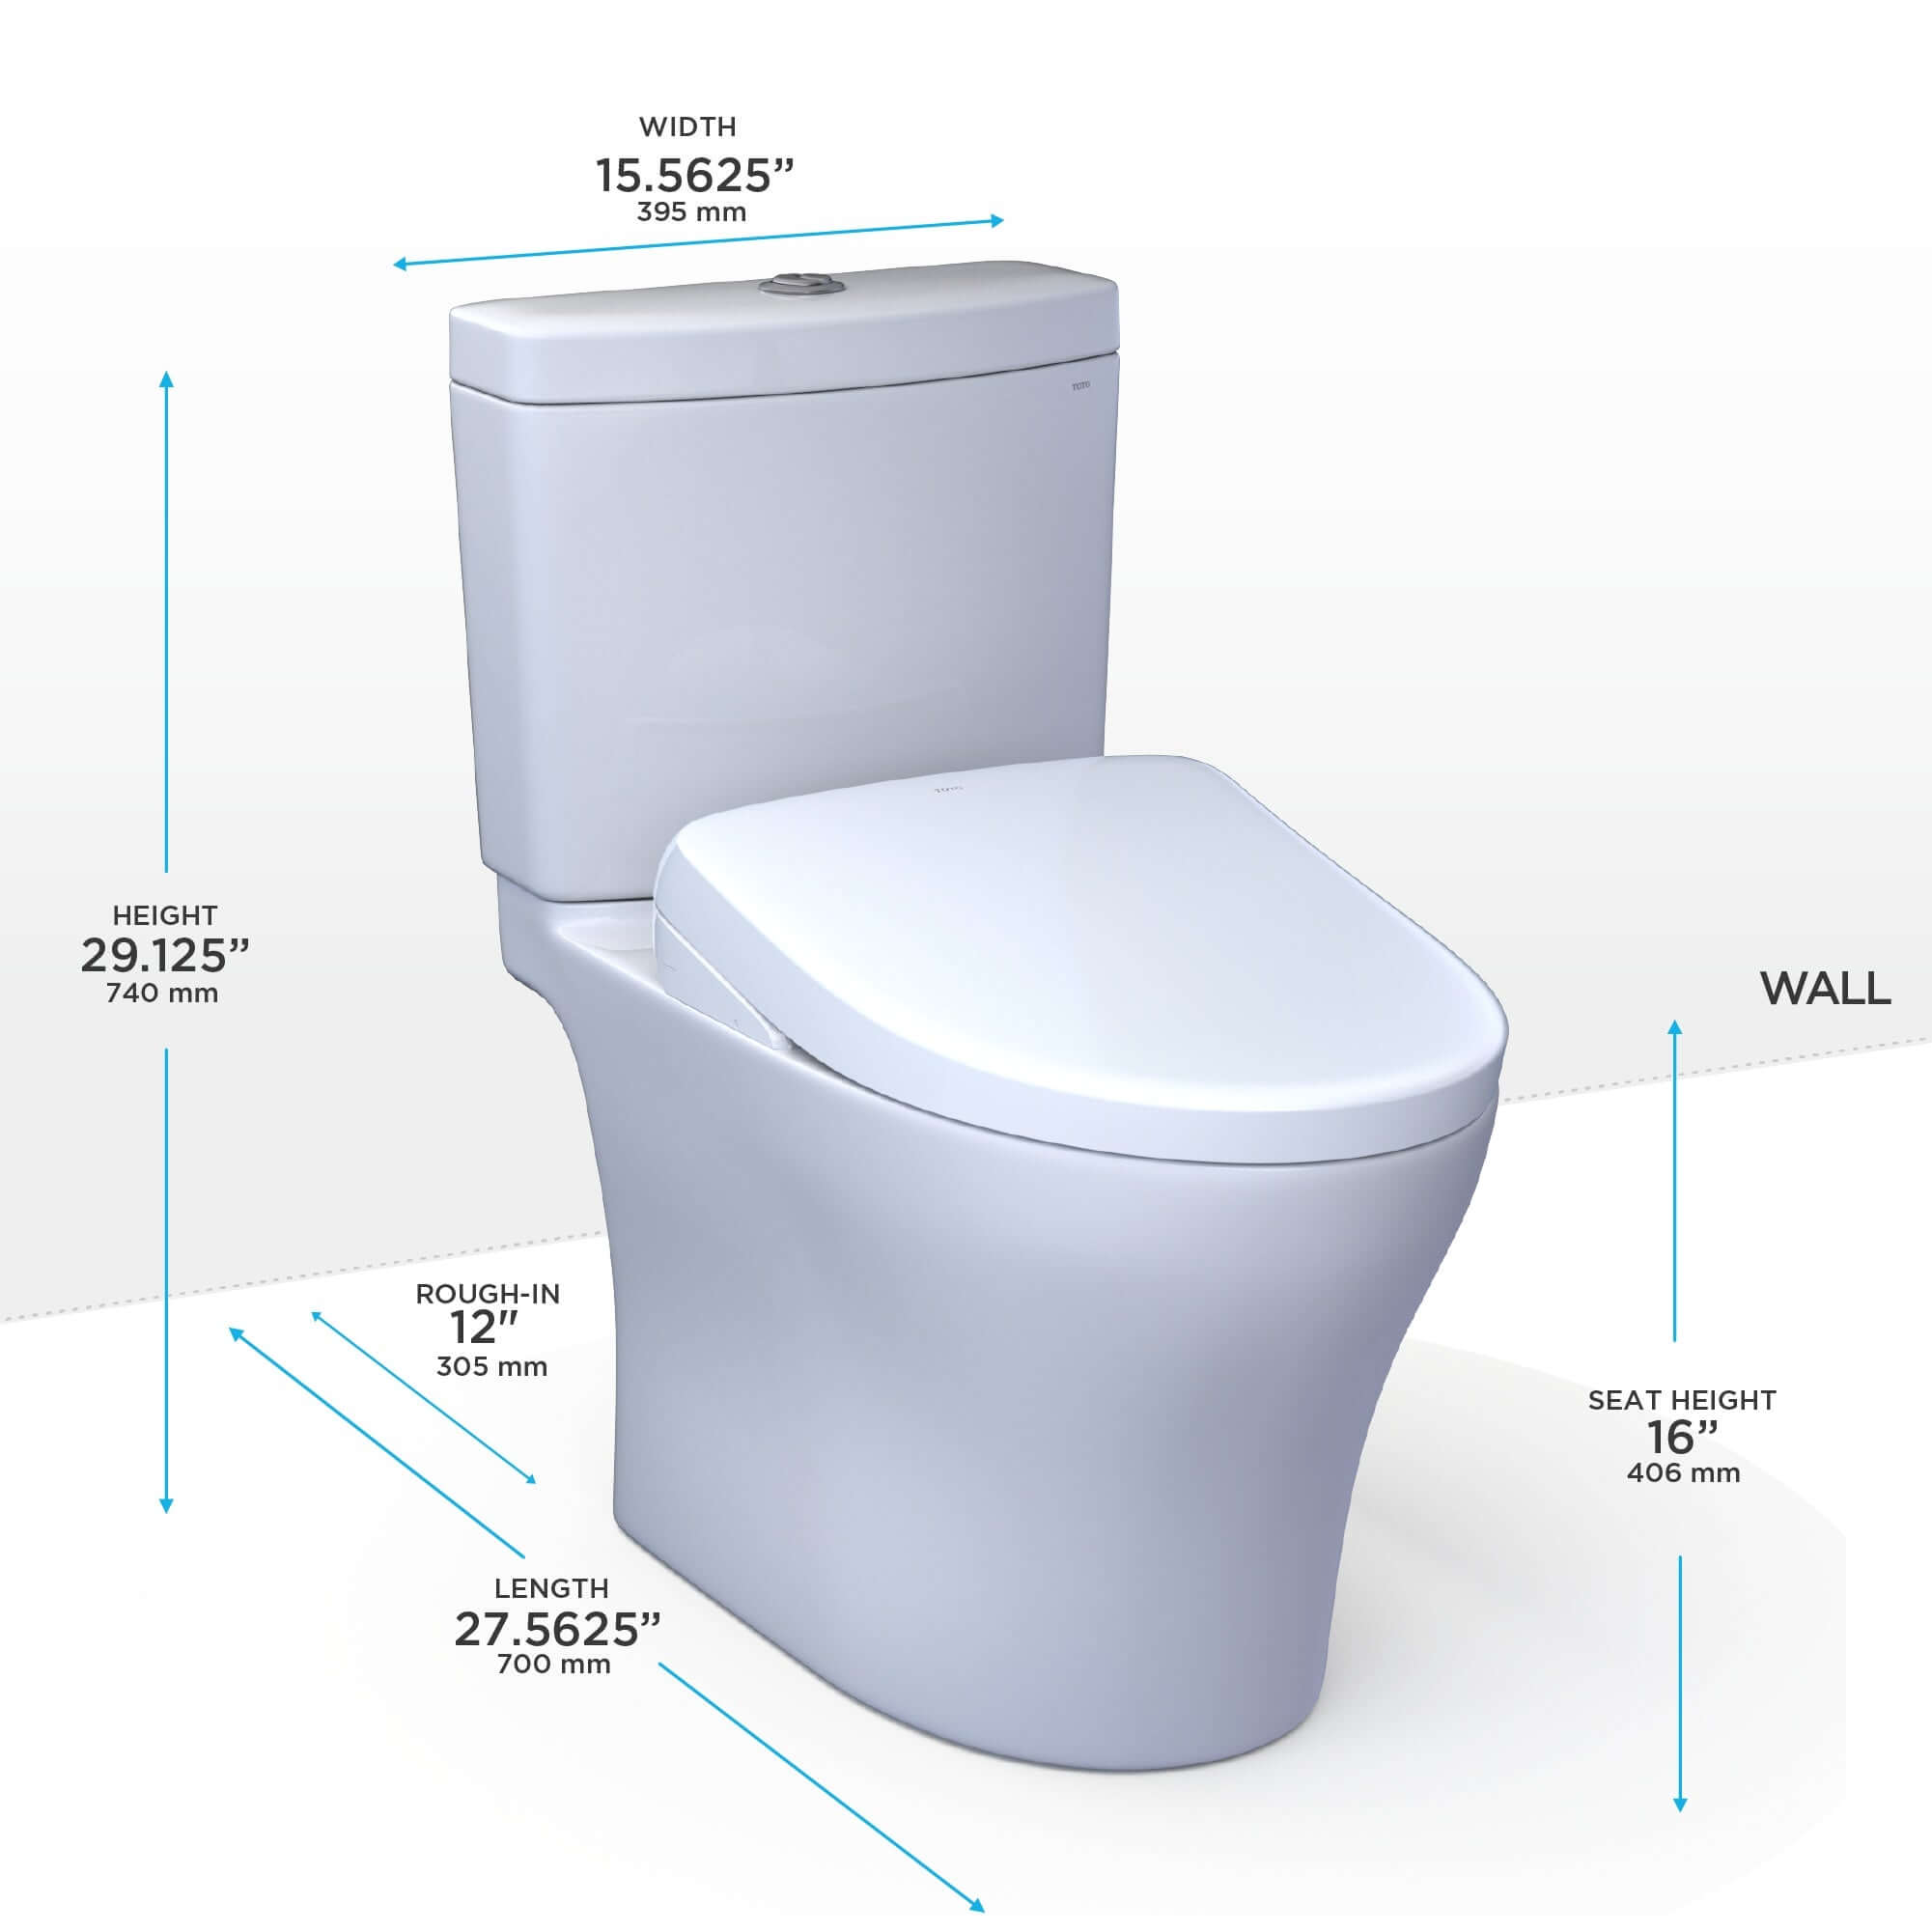 TOTO WASHLET+ Aquia IV Two-Piece Elongated Dual Flush 1.28 and 0.9 GPF Toilet and Contemporary WASHLET S7 Contemporary Bidet Seat, Cotton White - MW4464726CEMGN#01